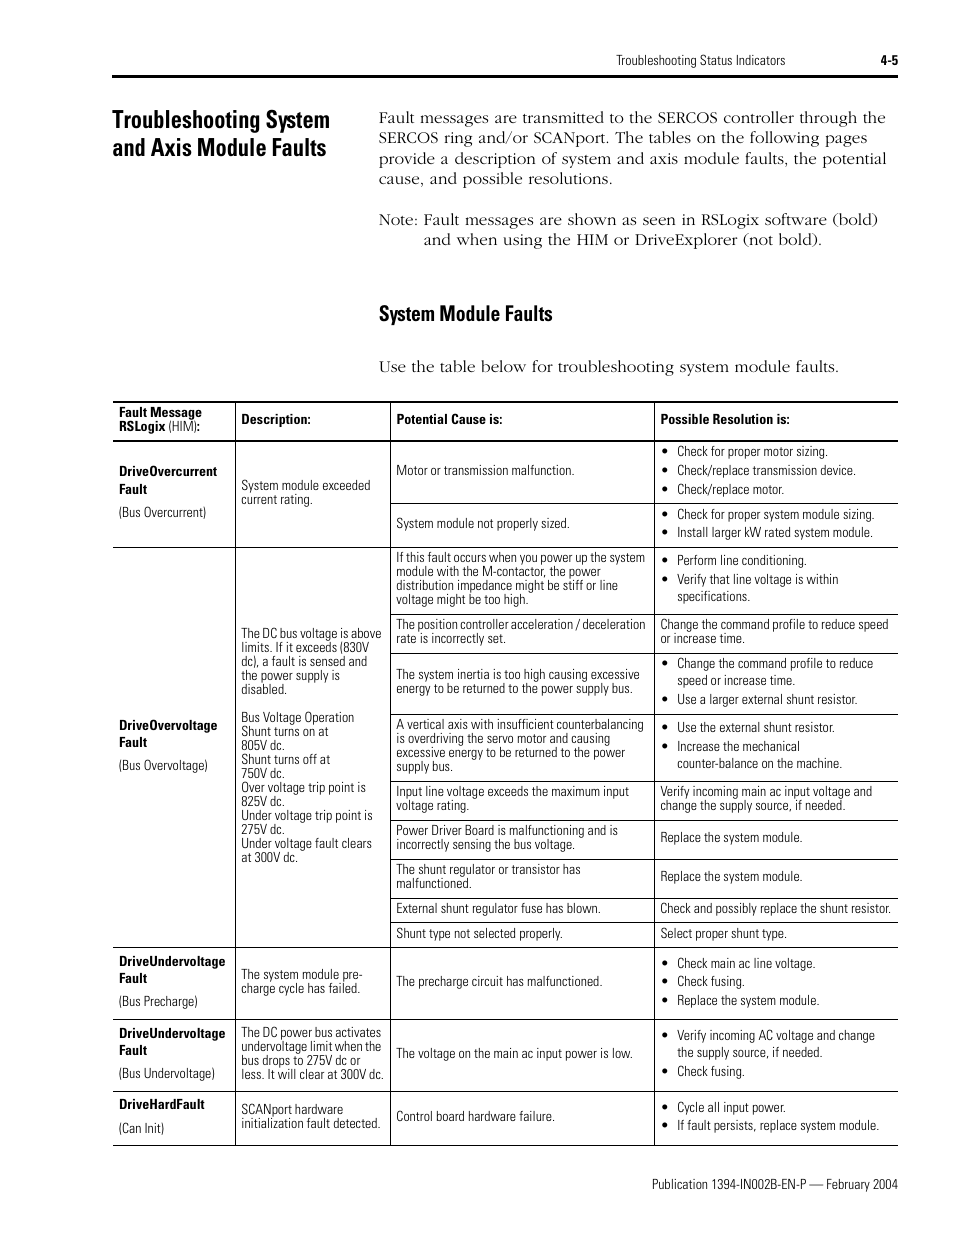 Troubleshooting system and axis module faults, System module faults |  Rockwell Automation 1394 SERCOS Interface Multi-Axis Motion Control System  Installation Manual User Manual | Page 97 / 147 | Original mode